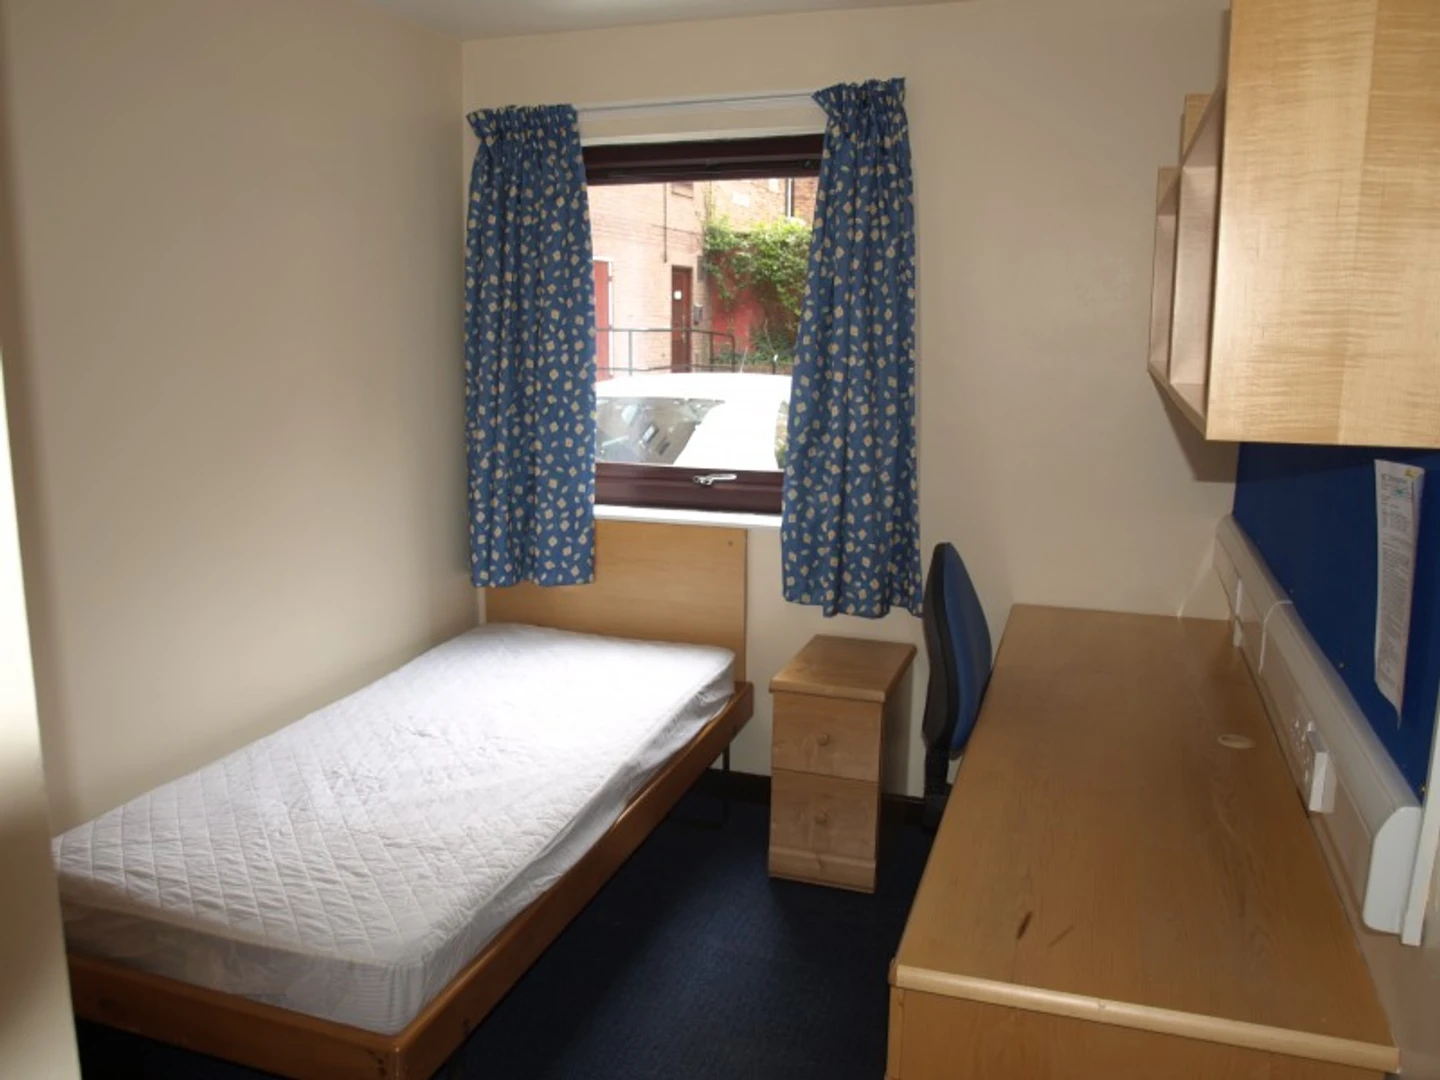 Shared room in 3-bedroom flat Newcastle Upon Tyne